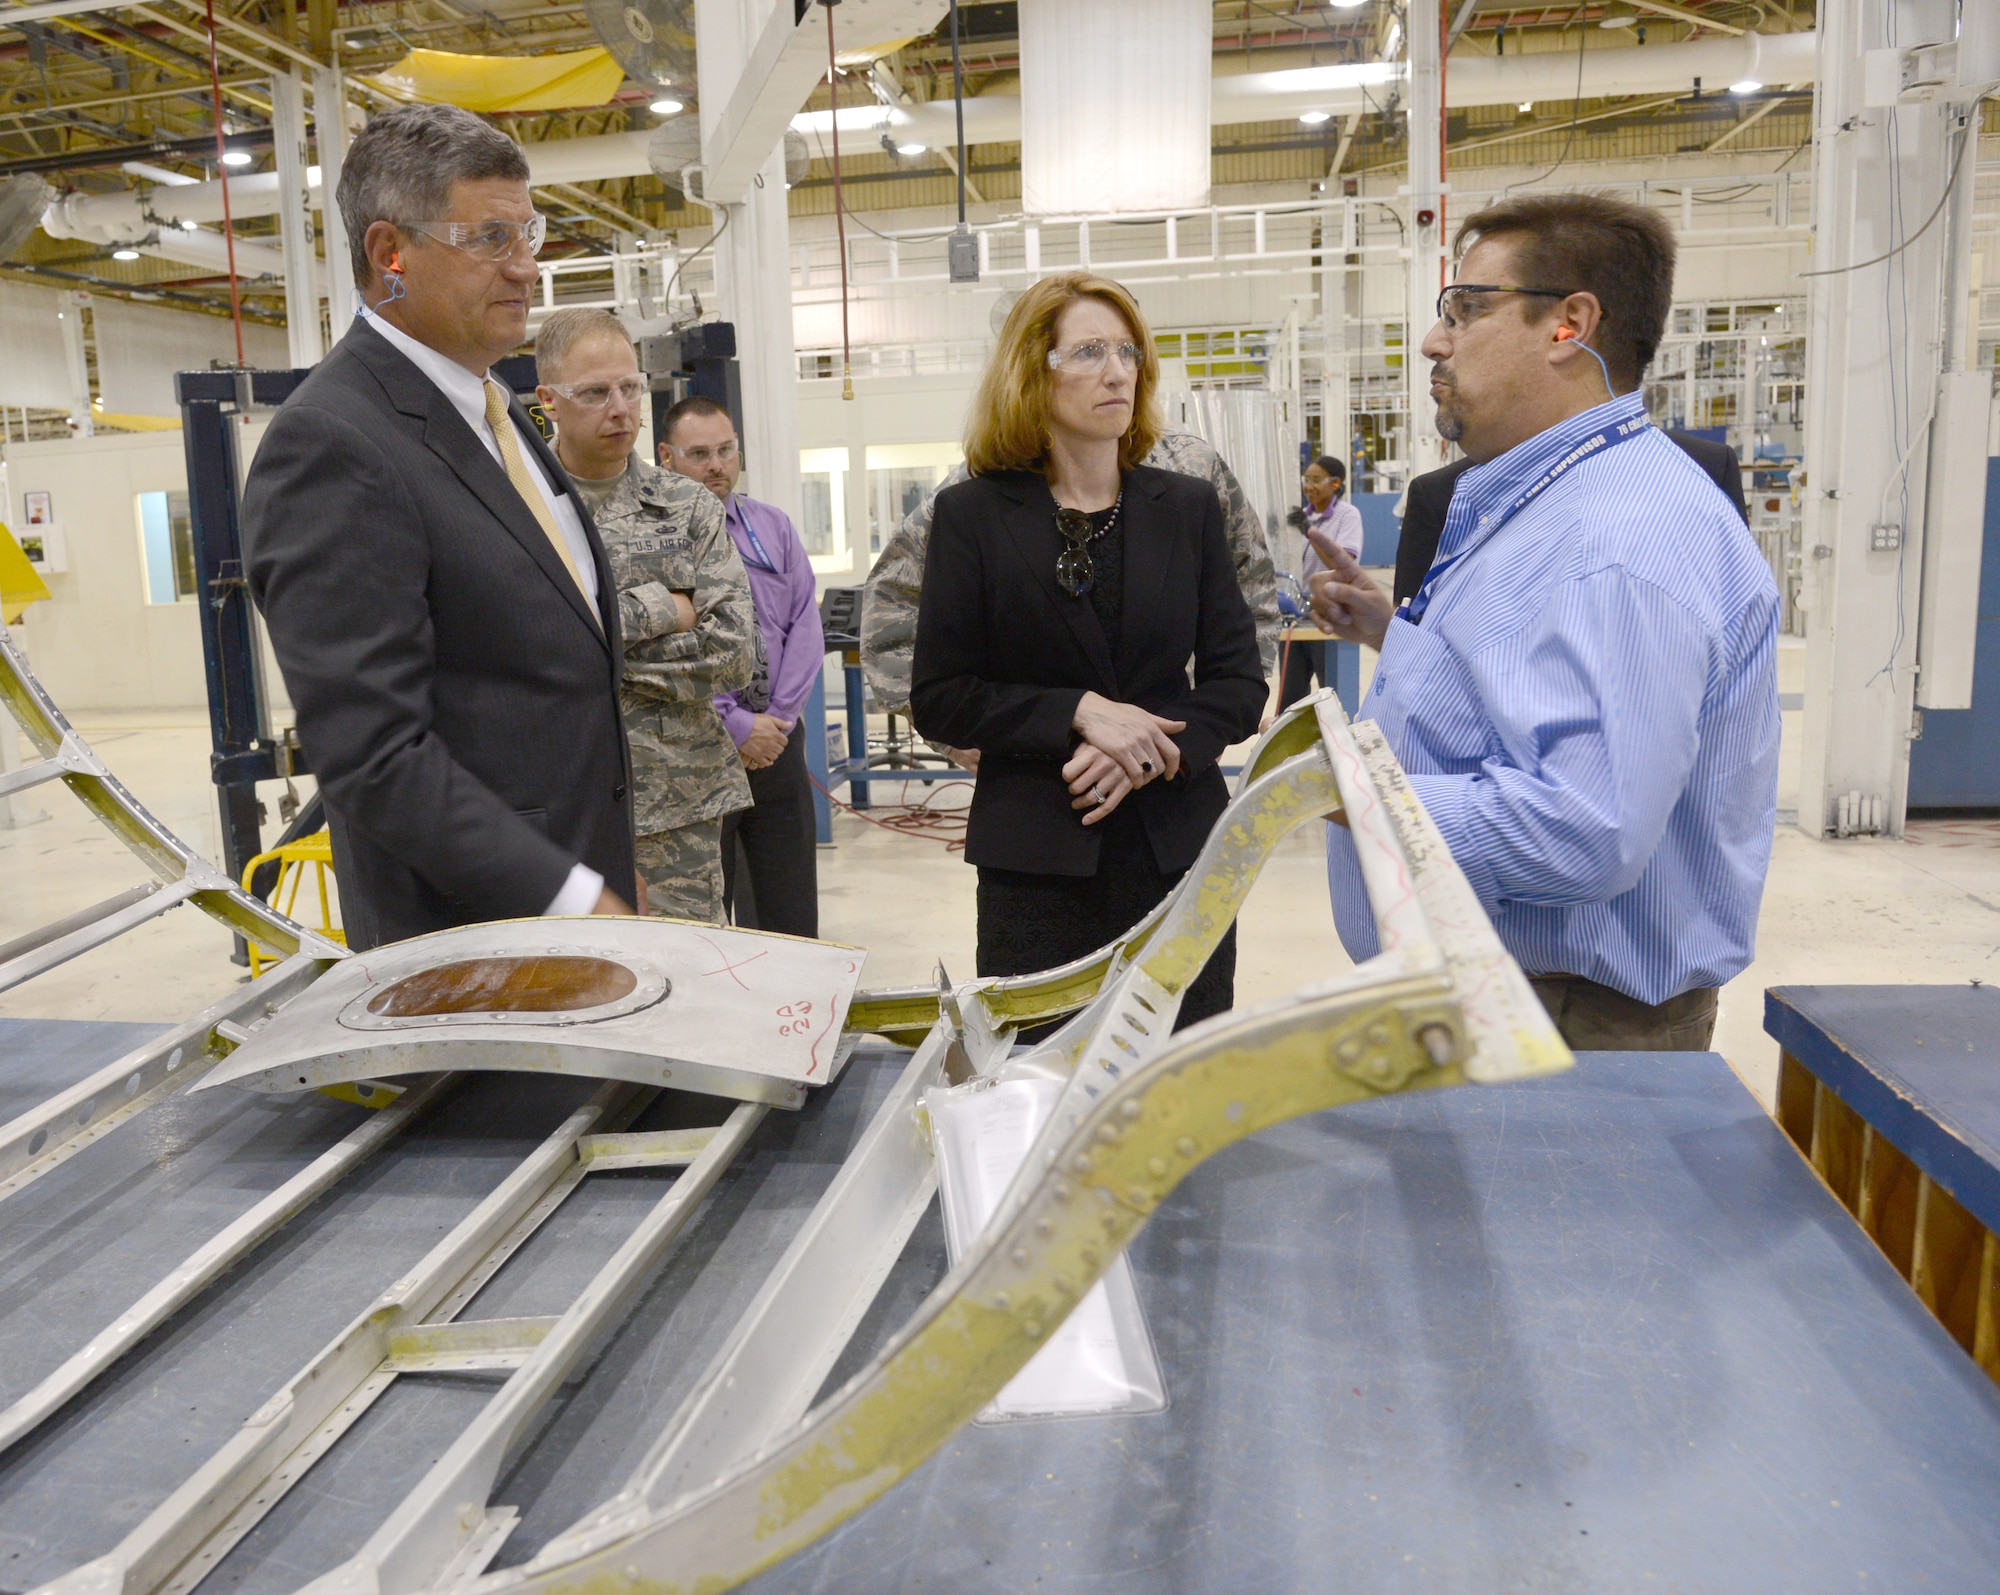 David Deal, with the 551st Commodities Maintenance Squadron, briefs the Honorable William LaPlante, Assistant Secretary of the Air Force (Acquisitions) (far left), and The Honorable Lisa Disbrow, the Acting Under Secretary of the Air Force and the Assistant Secretary of the Air Force for Financial Management and Comptroller (center), on how modular flow has increased cost-effective readiness in the B-52 Wrap Cowls shop.  The two senior leaders visited several Oklahoma Air Logistics Complex work centers as part of the visit to the AFSC here on Monday. U.S. Air Force photo by Kelly White.